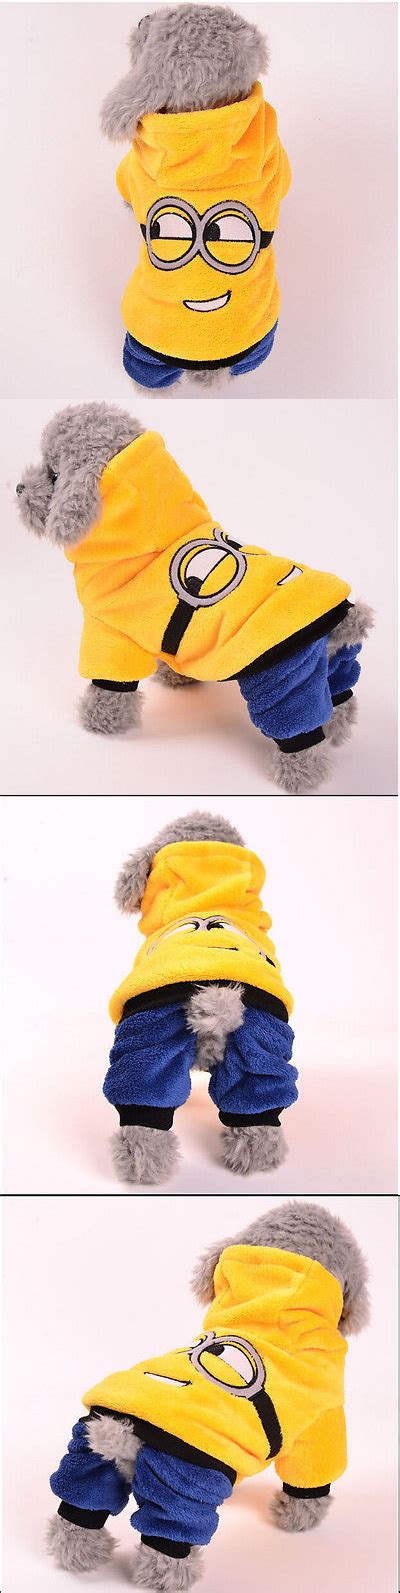 Winter Warm Coat Hoodie For Pet Dog Cute Minion Exclusively On